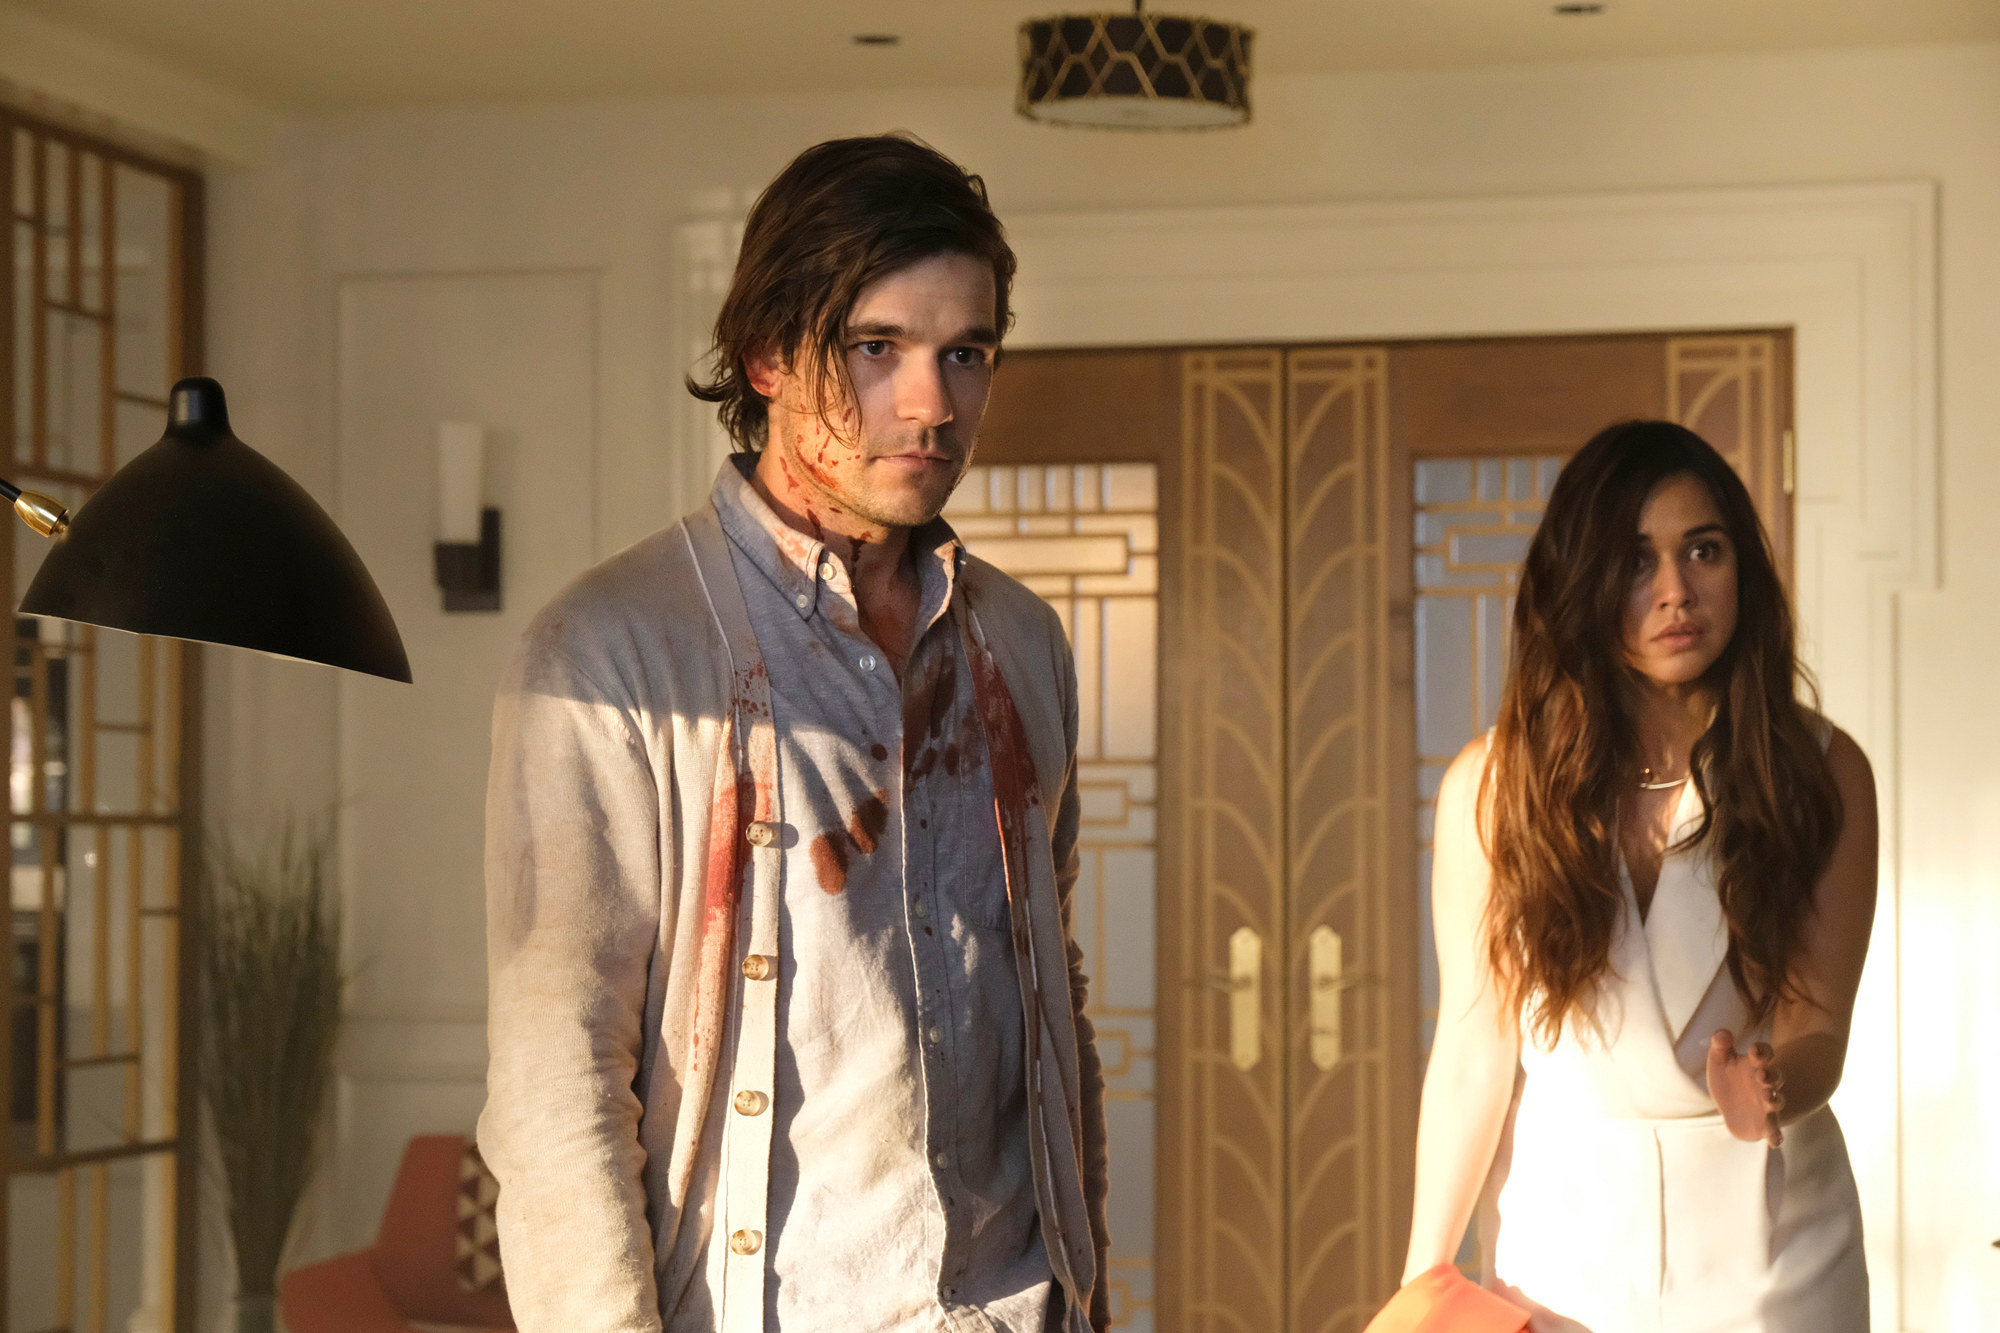 A man in a white shirt covered in blood stands looking at something calmly. A young woman behind him appears scared.